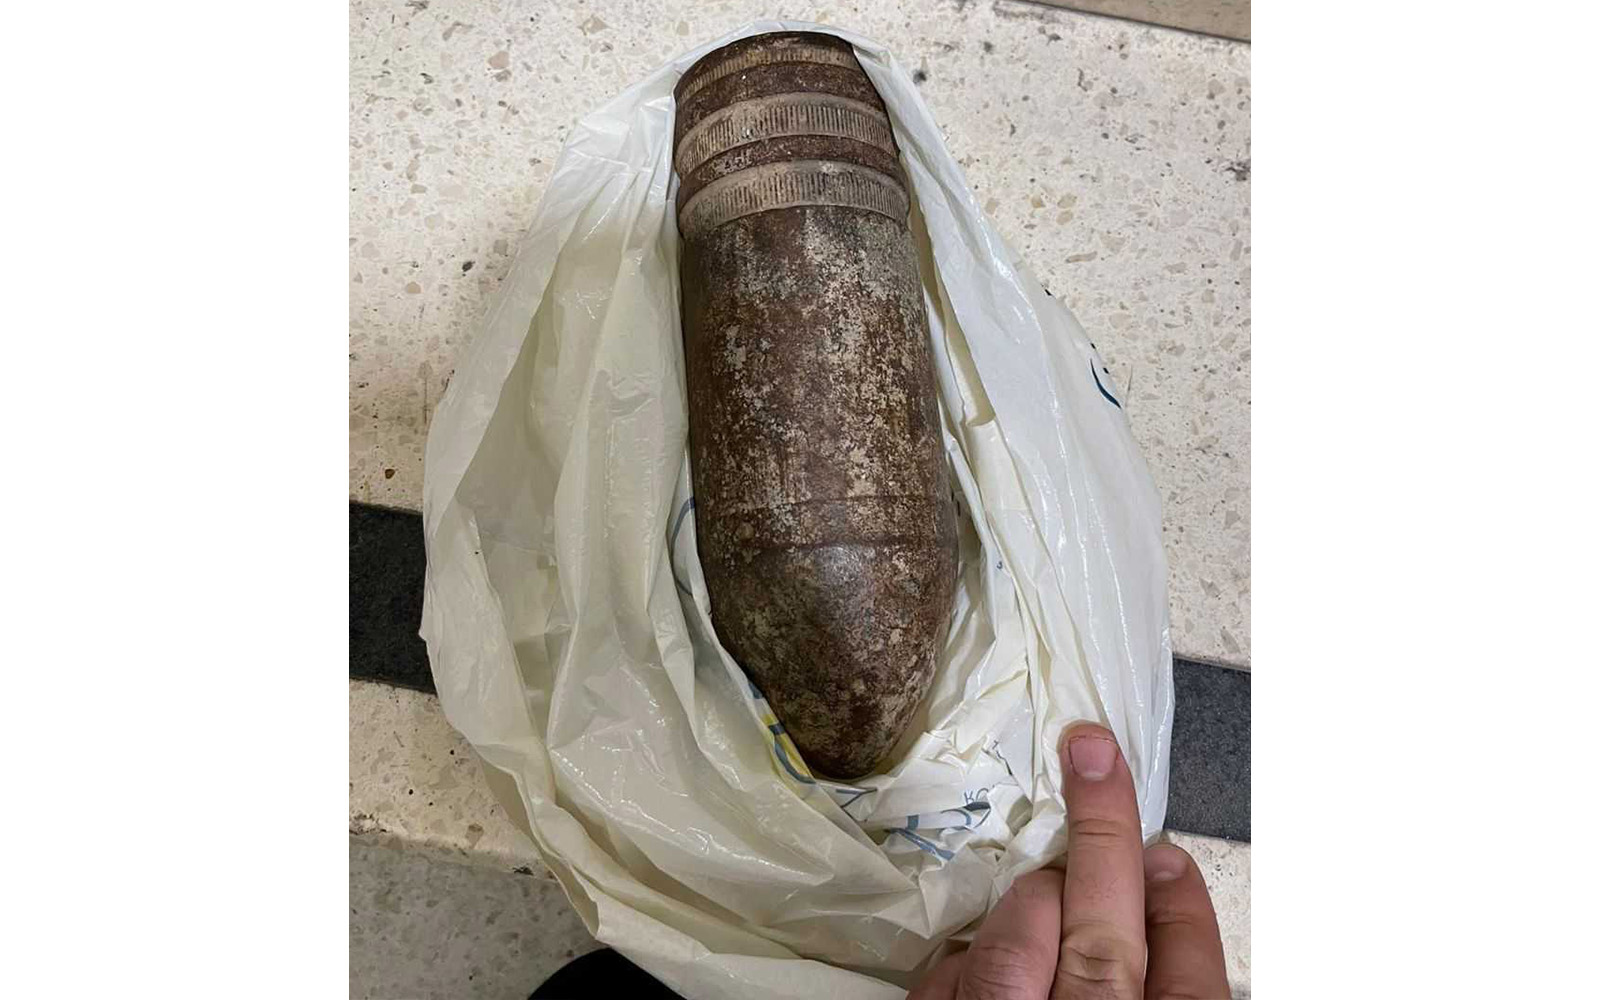 The family had brought the shell as a souvenir, authorities said. (Israel Airport Authority)